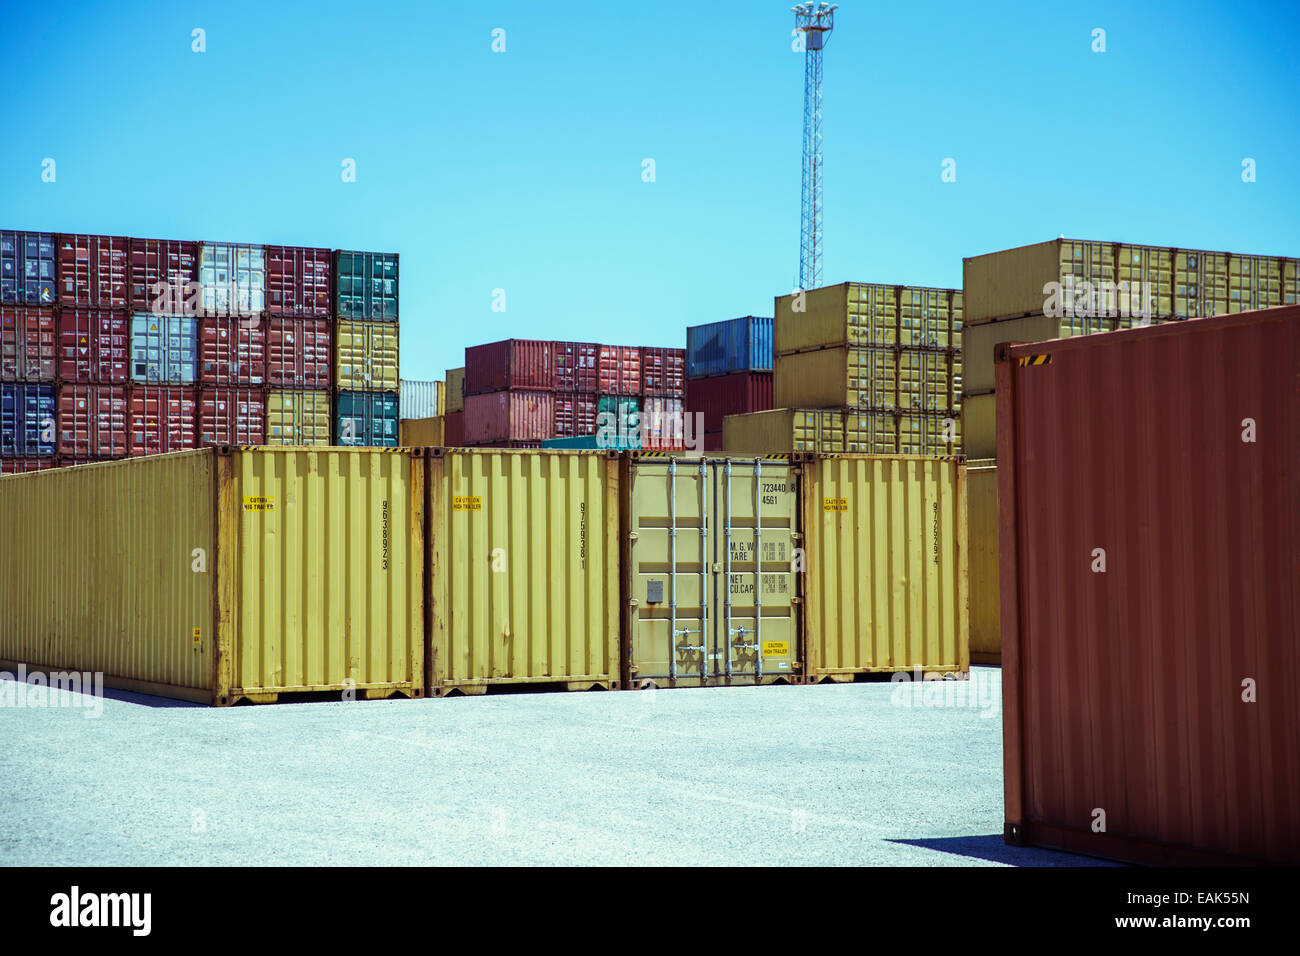 Stacks of cargo containers Stock Photo